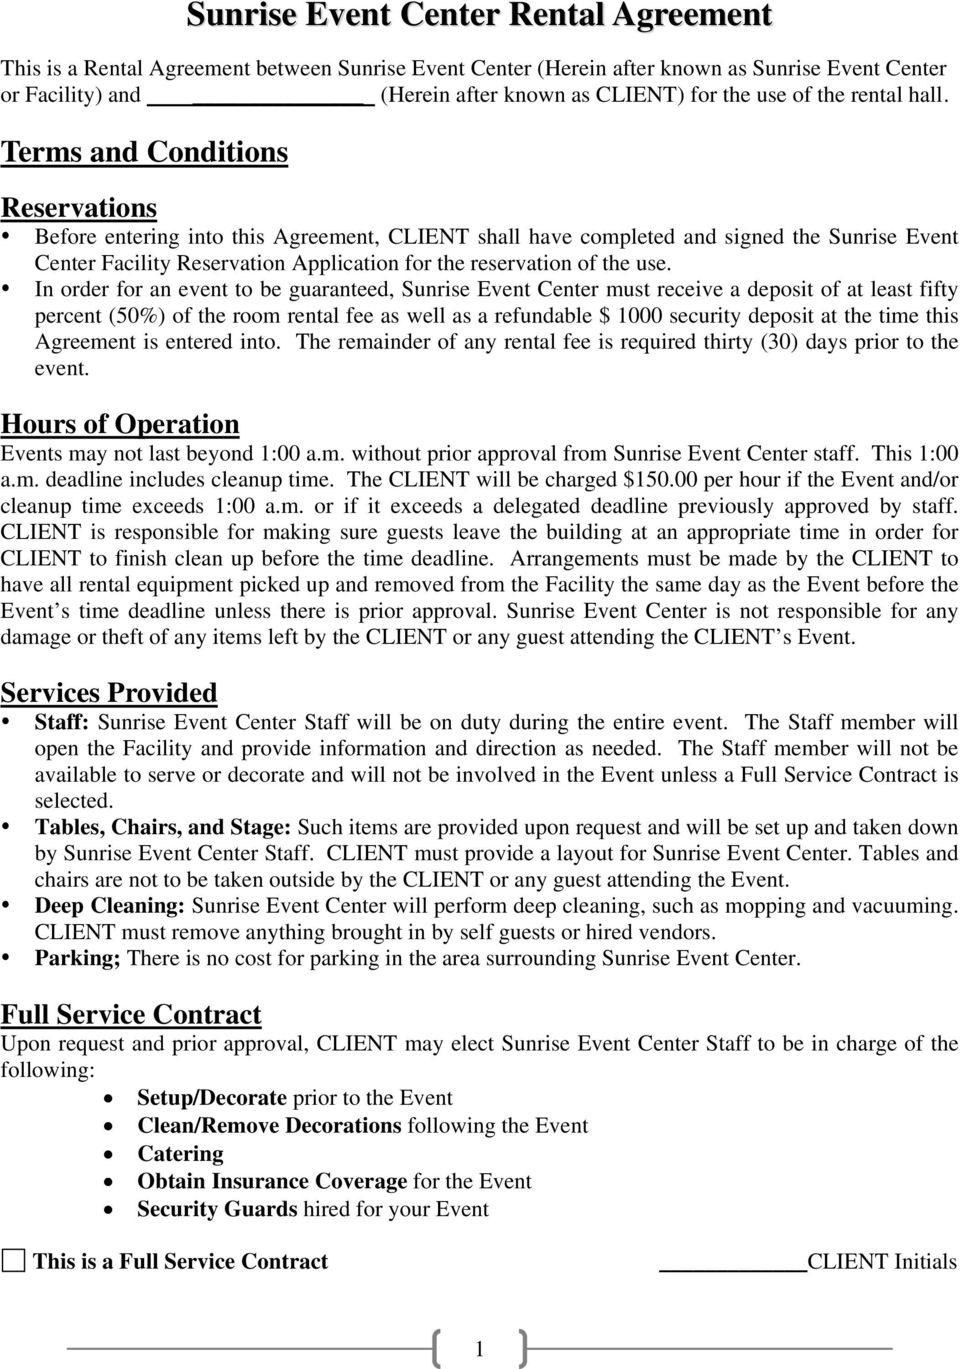 Service Agreement Terms And Conditions Terms And Conditions This Is A Full Service Contract Pdf